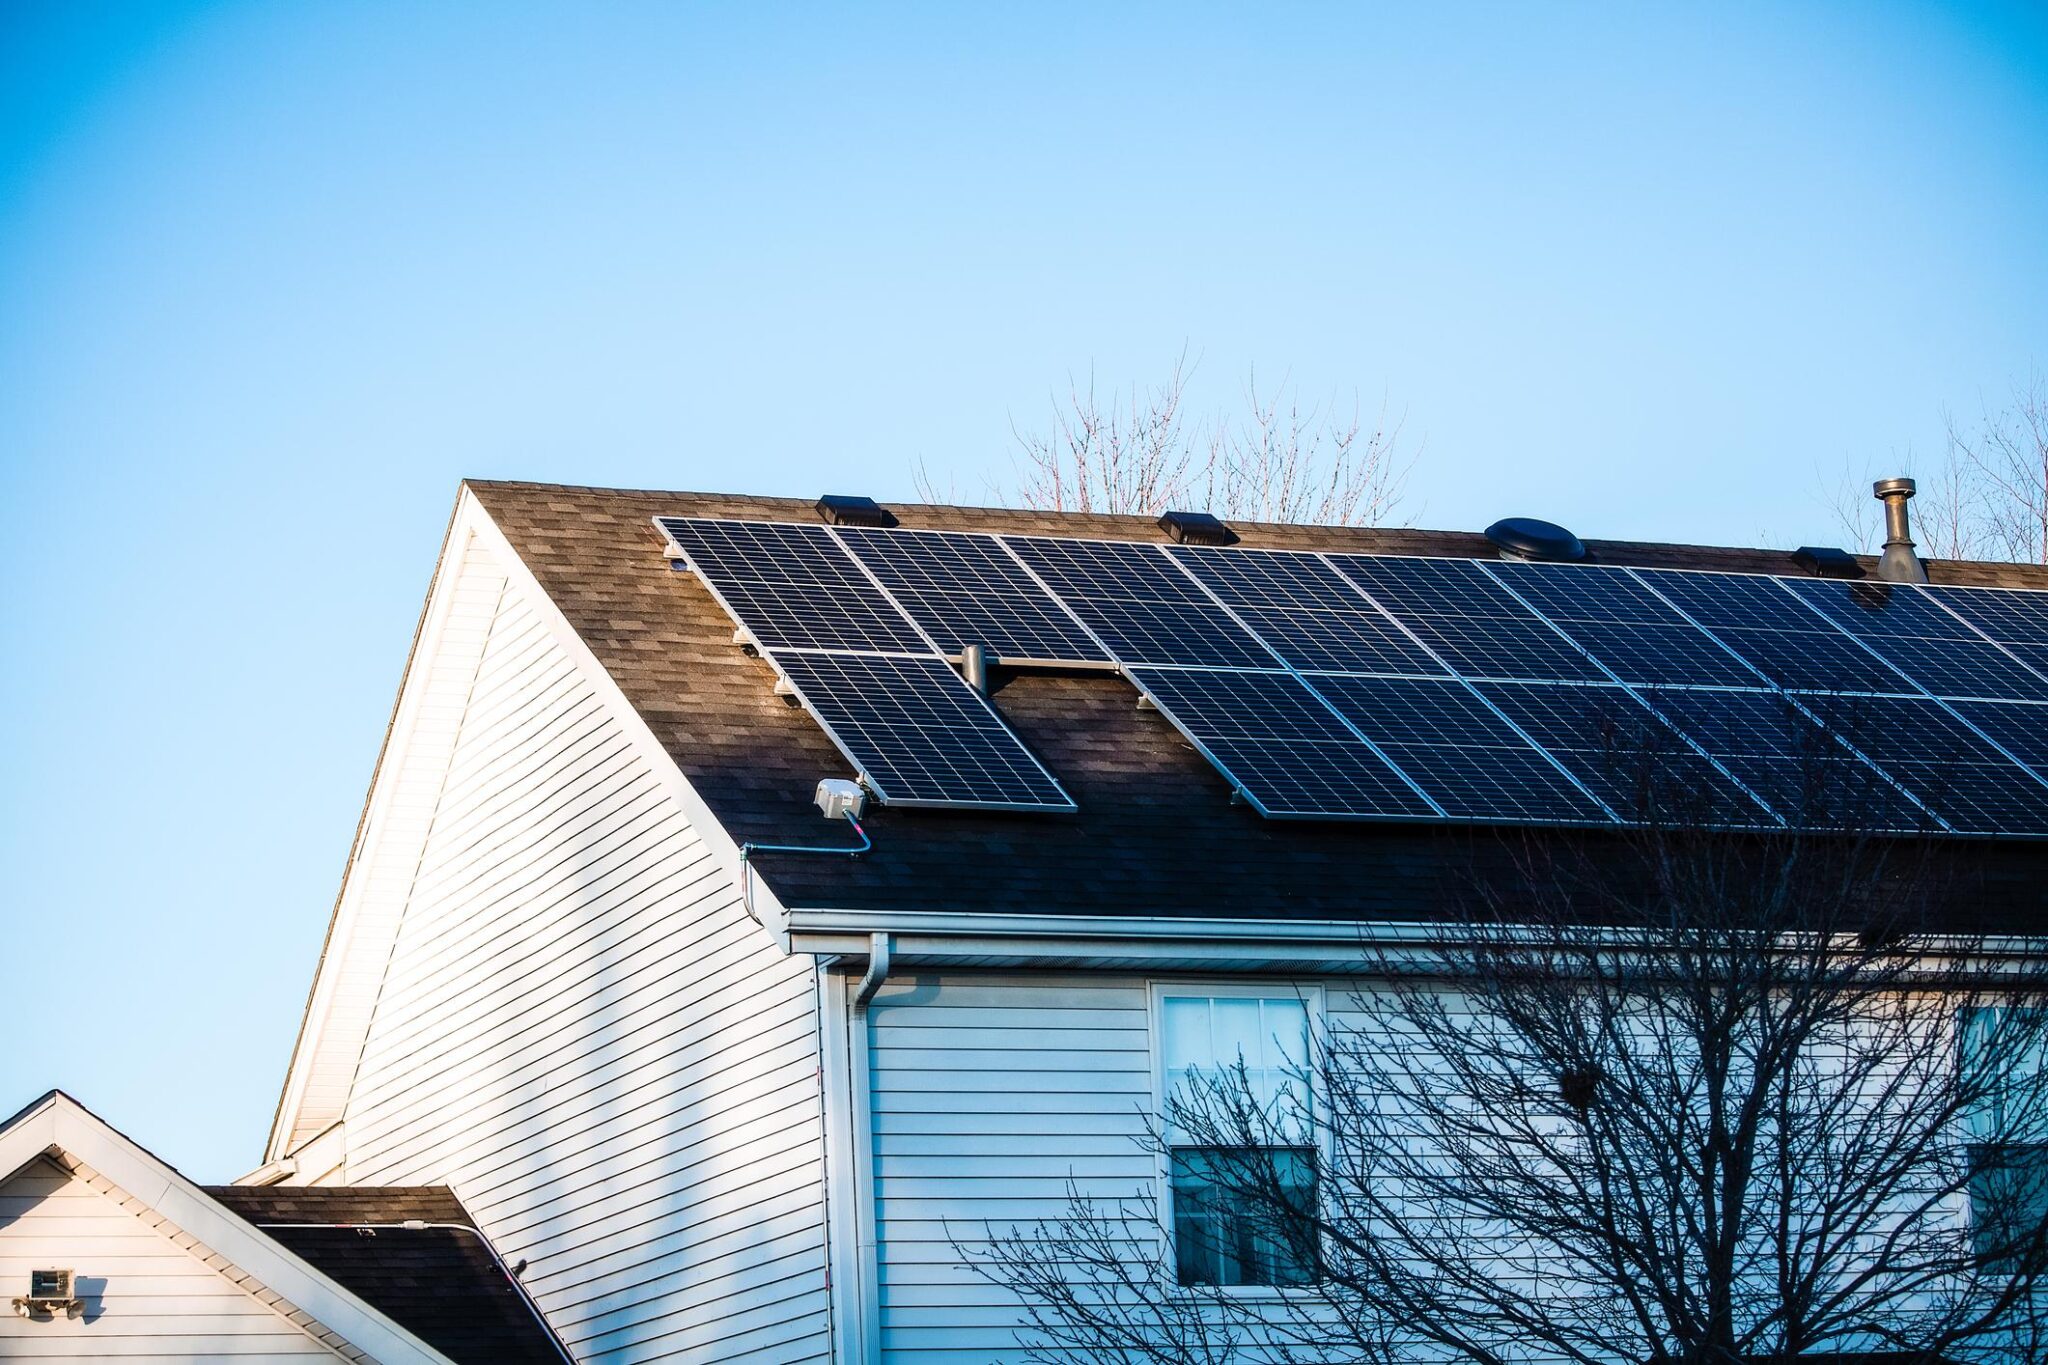 solar panels on the roof of a house in winter in Cherry Valley, Illinois